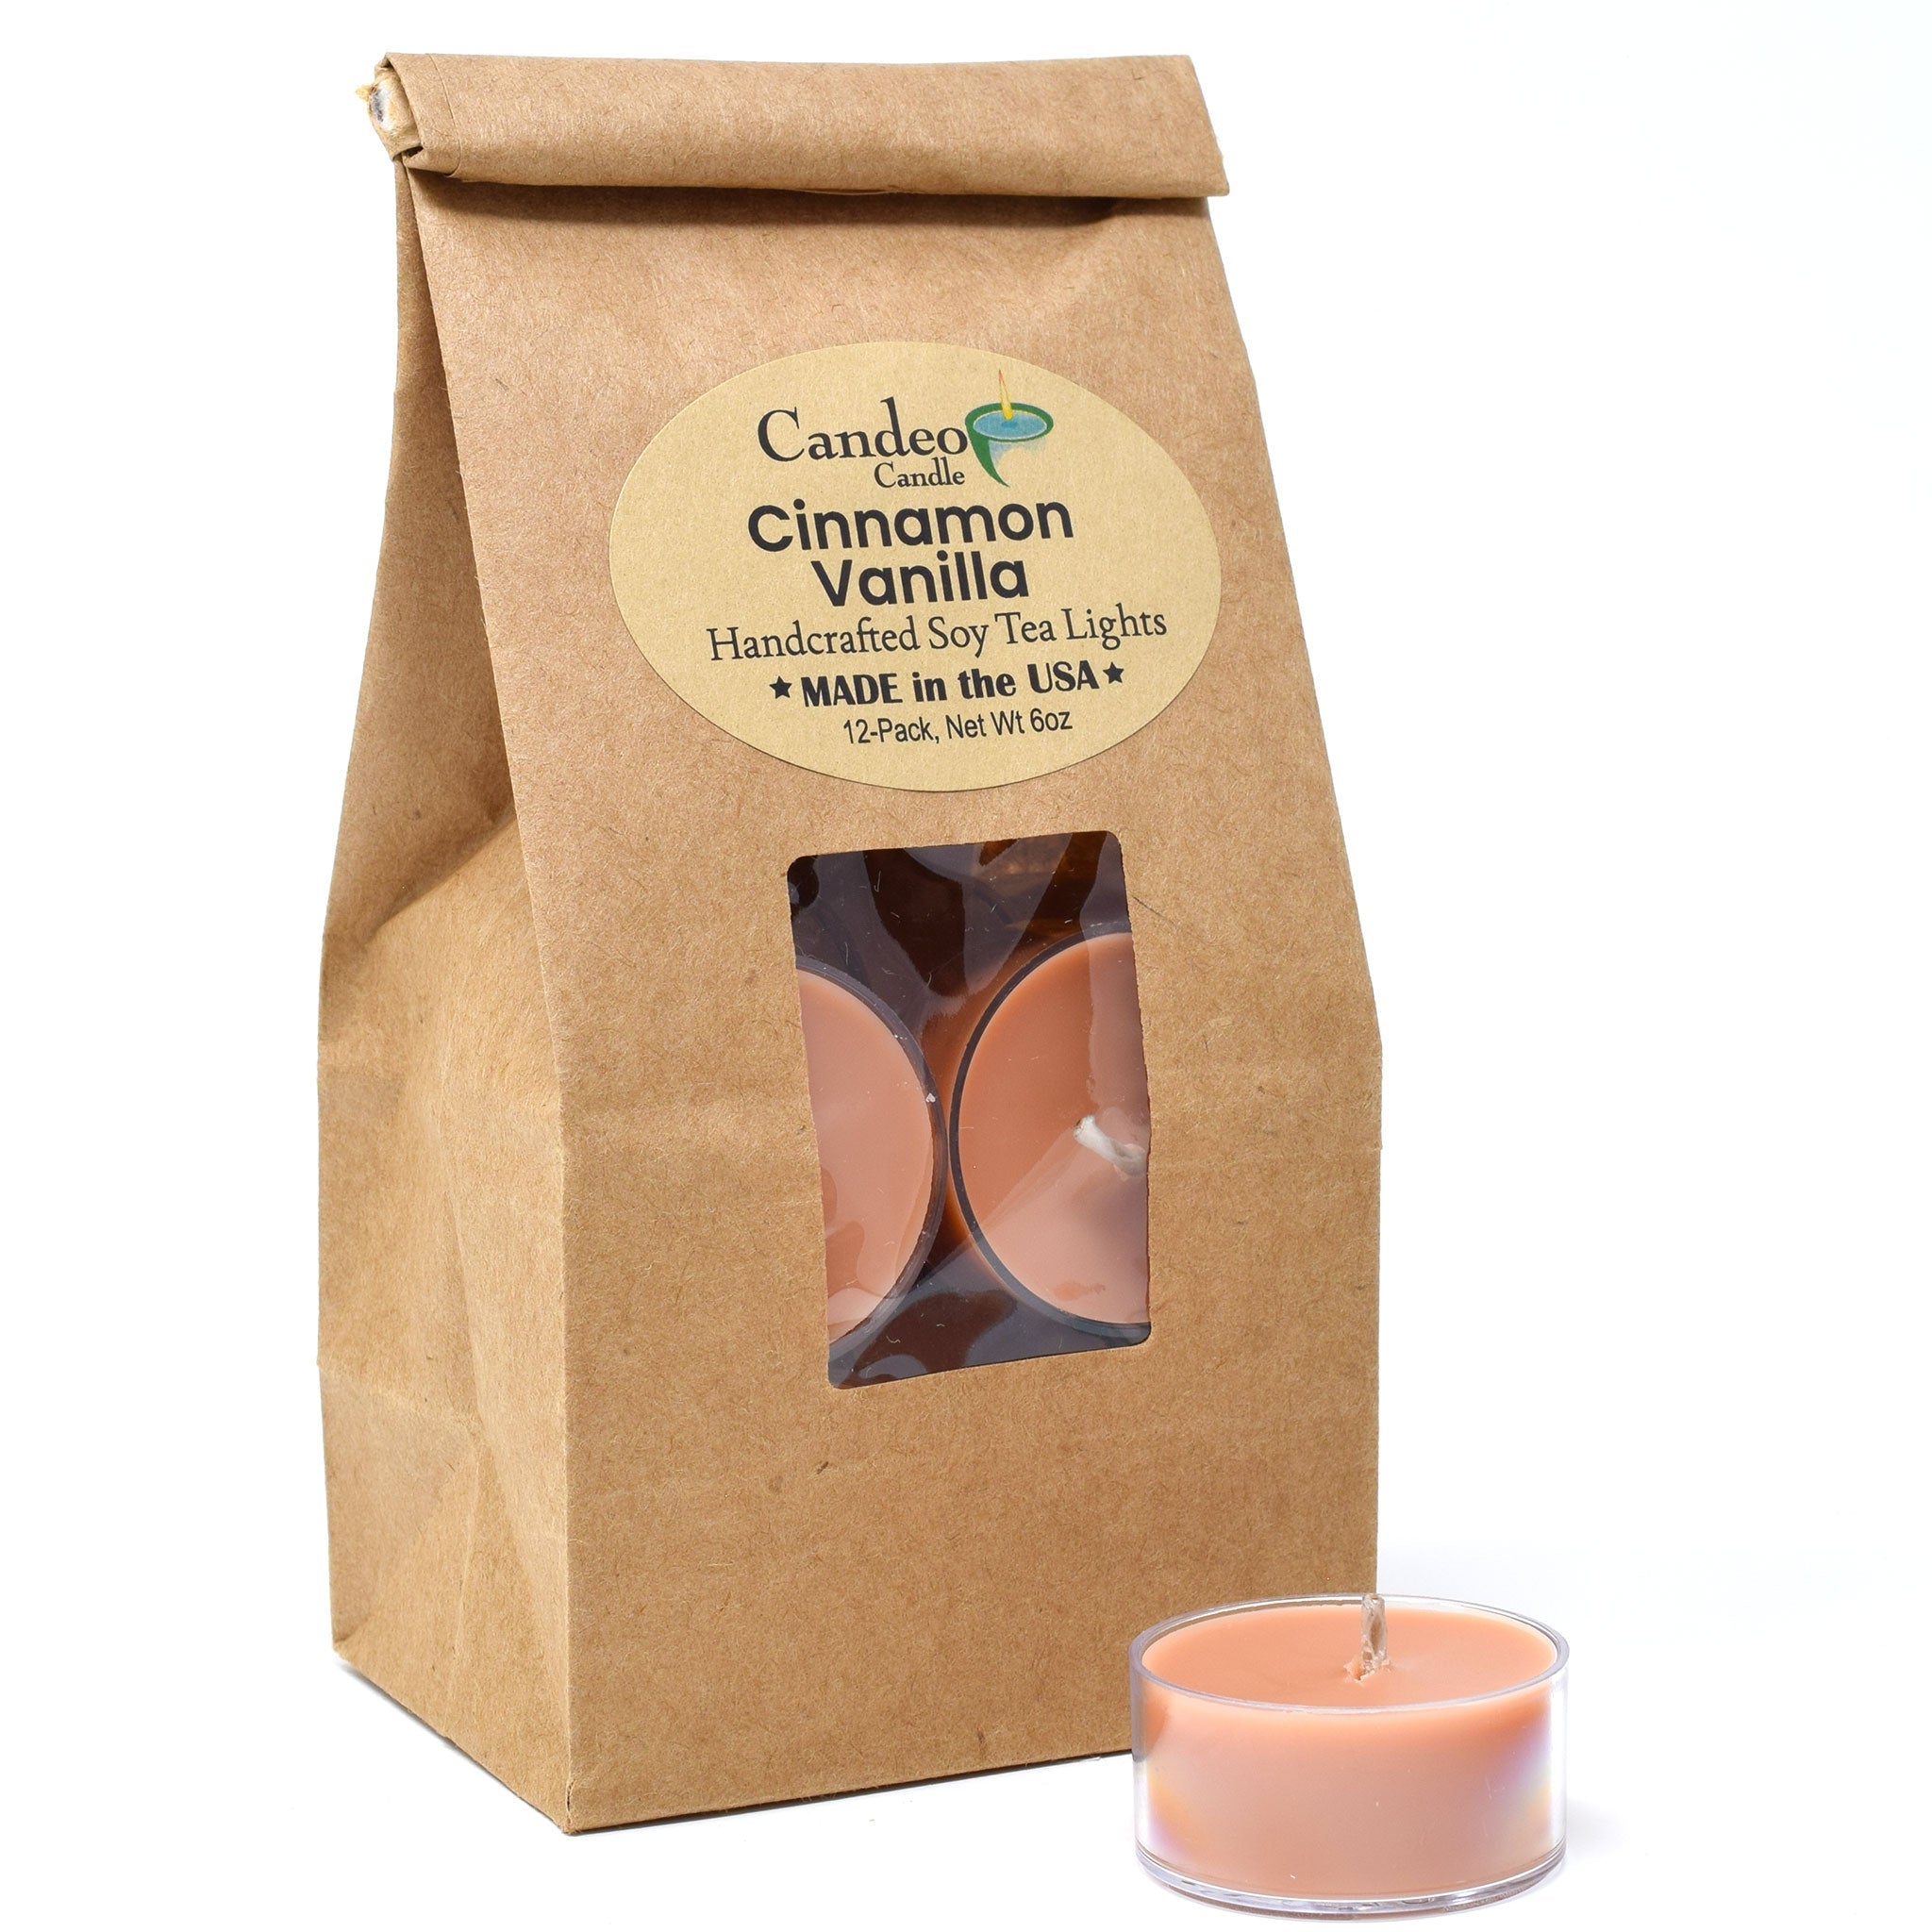 Cinnamon Vanilla, Soy Tea Light 12-Pack - Candeo Candle